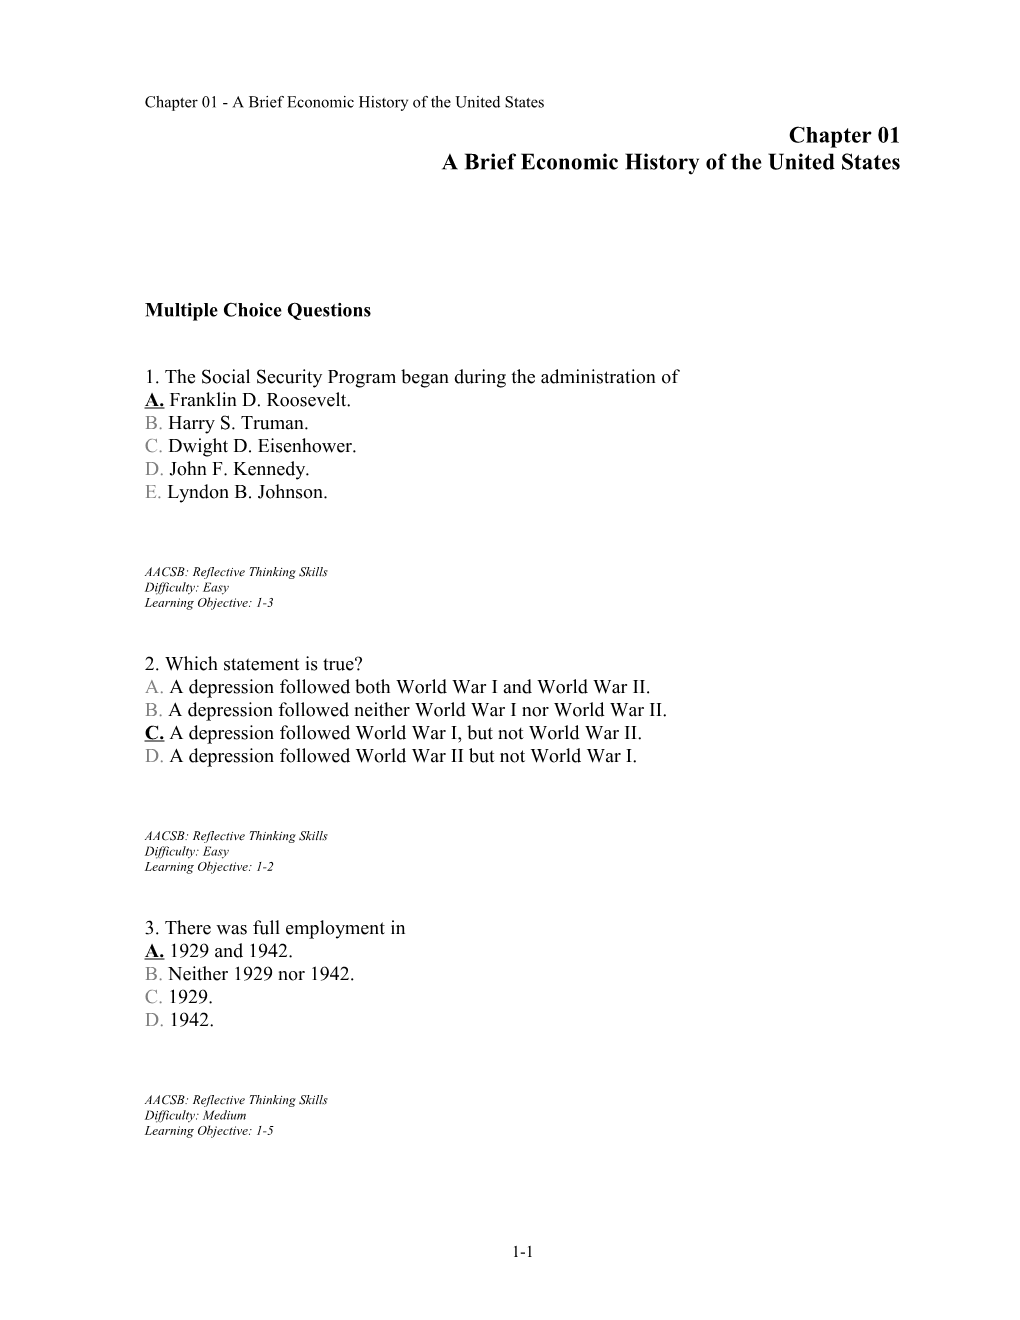 Chapter 01 a Brief Economic History of the United States